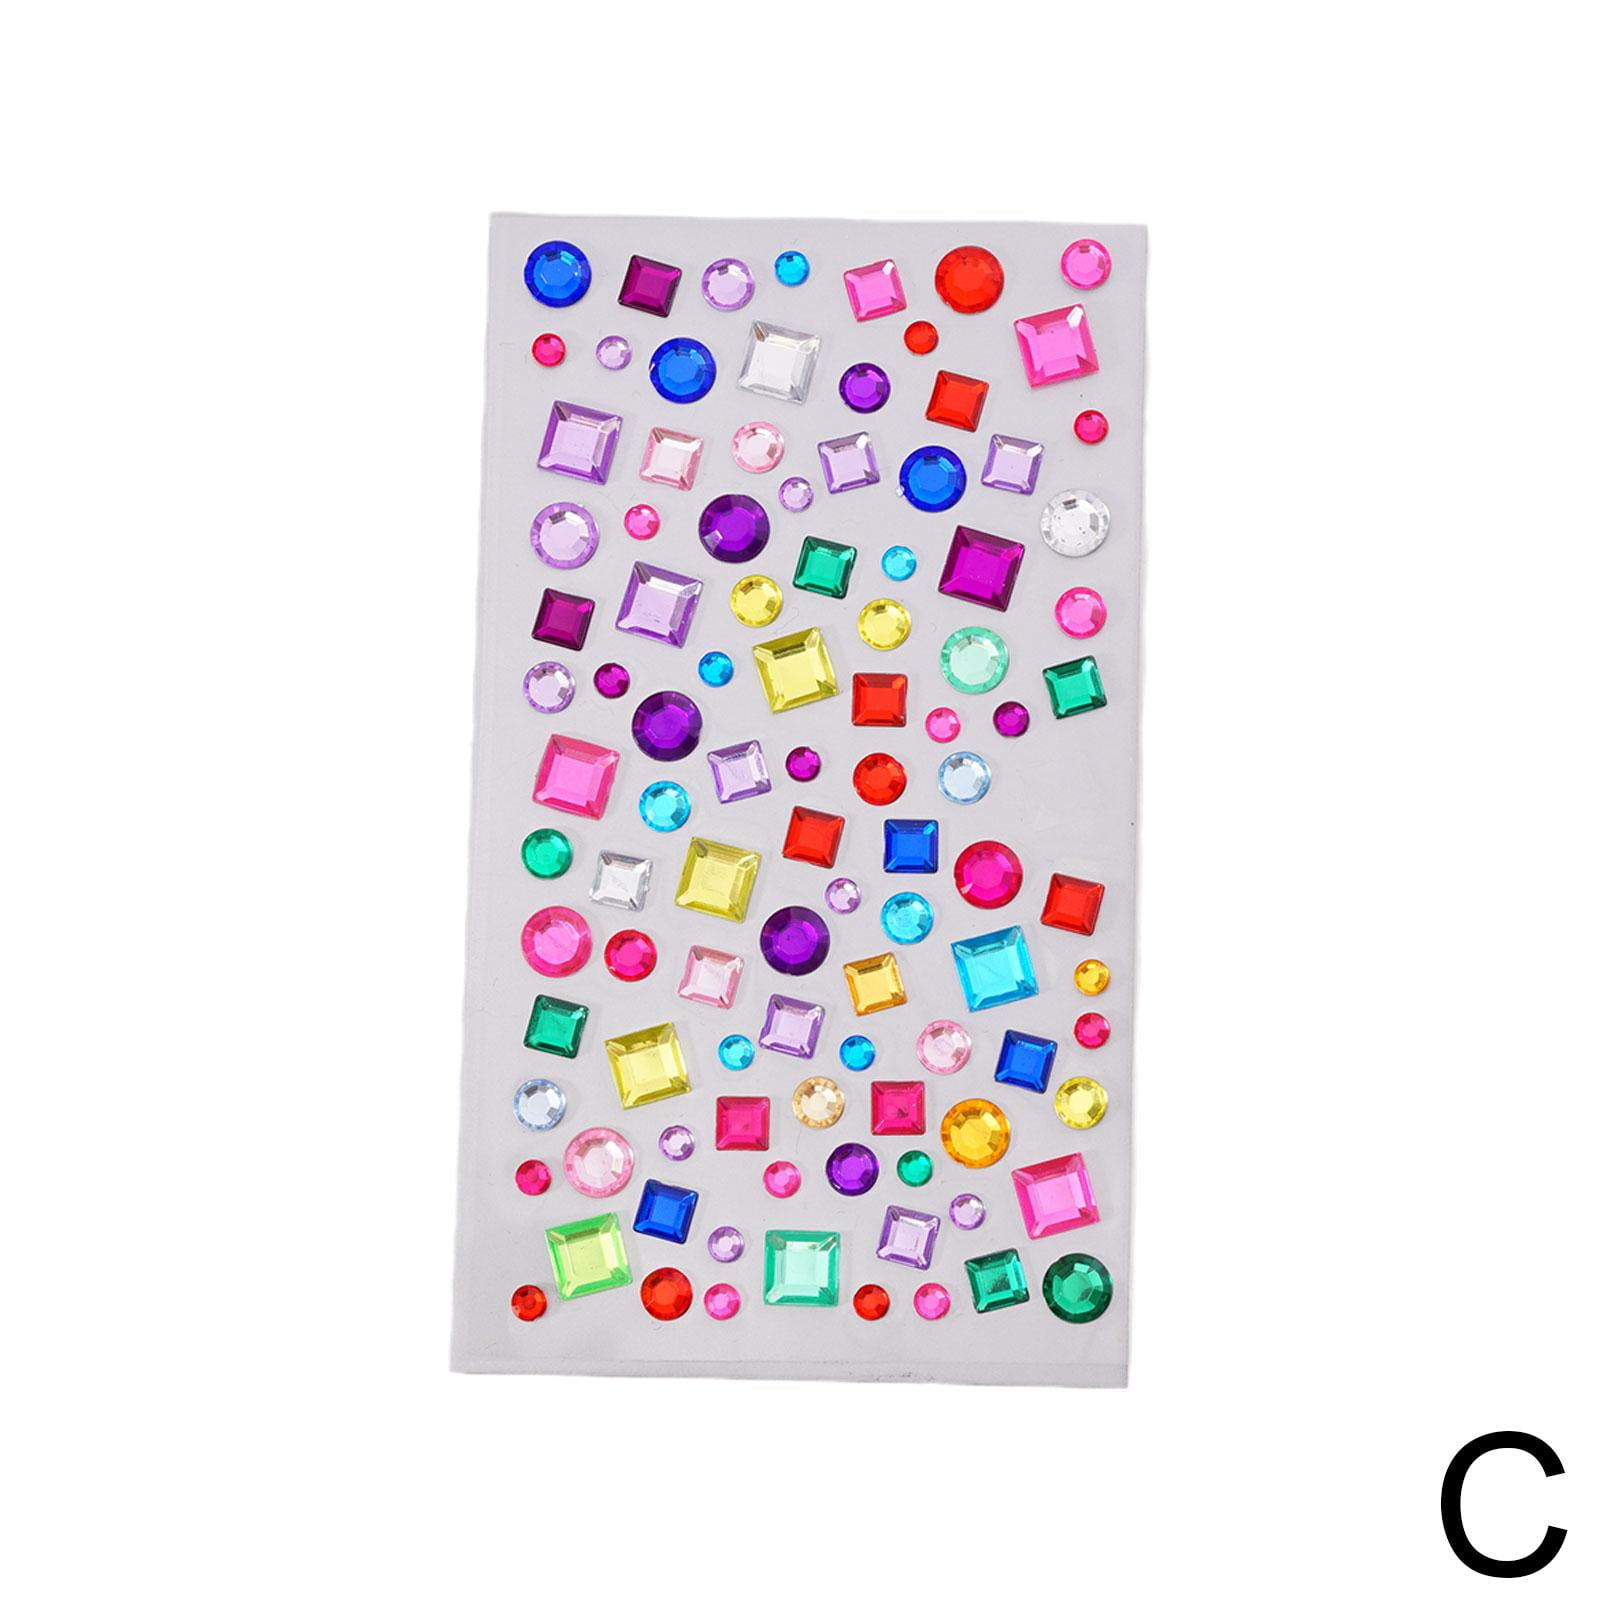 Antner Self-Adhesive Rhinestone Stickers Gems for Crafts Bling Jewelsxp H7c0, Size: 7.5, Round + Square One Size